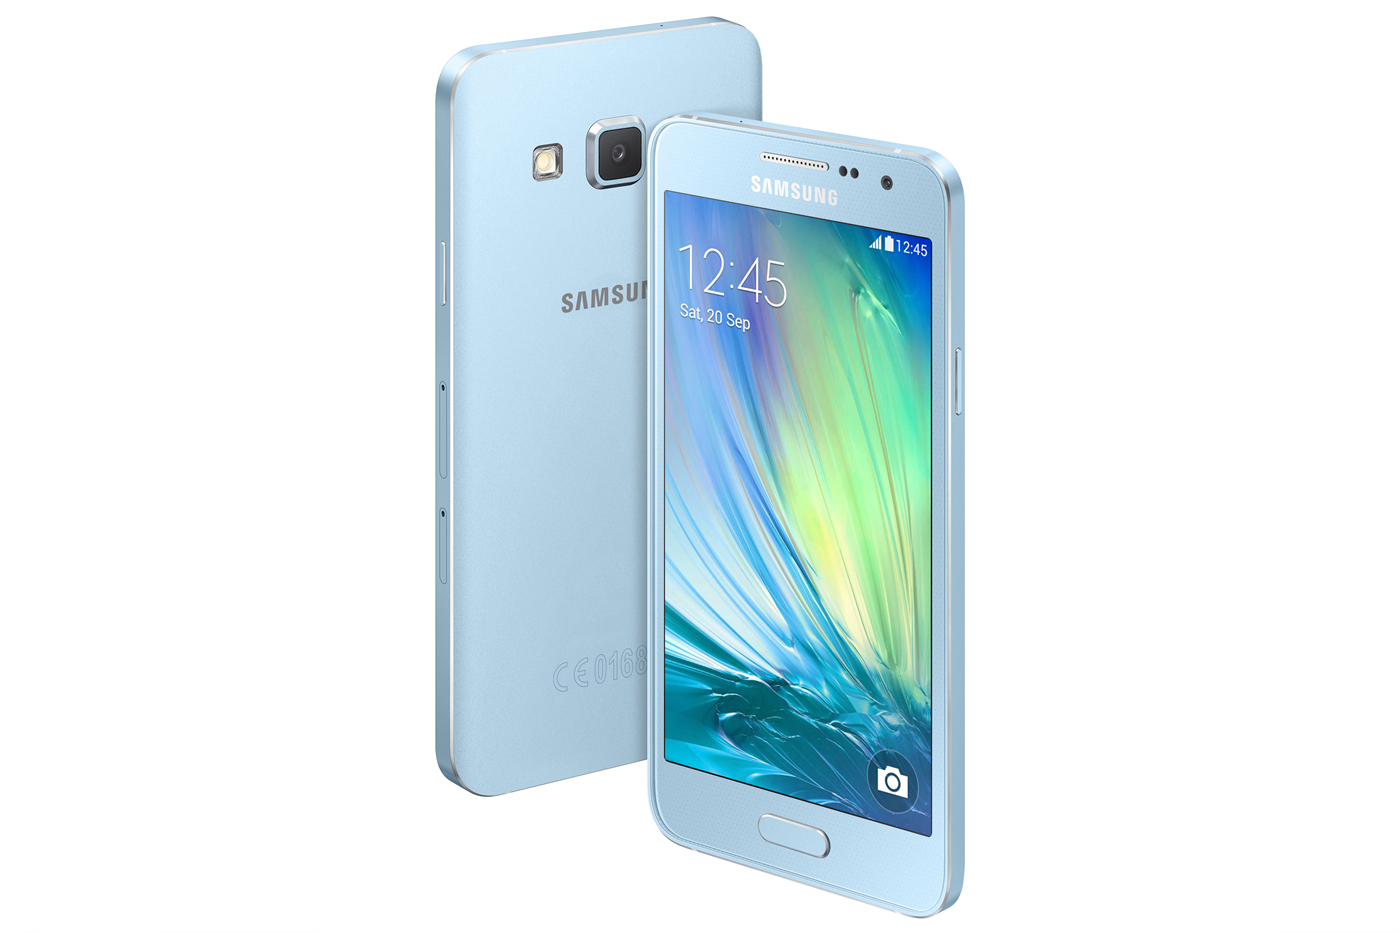 Gezond Missend Grens Samsung Announces The Galaxy A5 And Galaxy A3, Its “Slimmest Smartphones To  Date” | TechCrunch